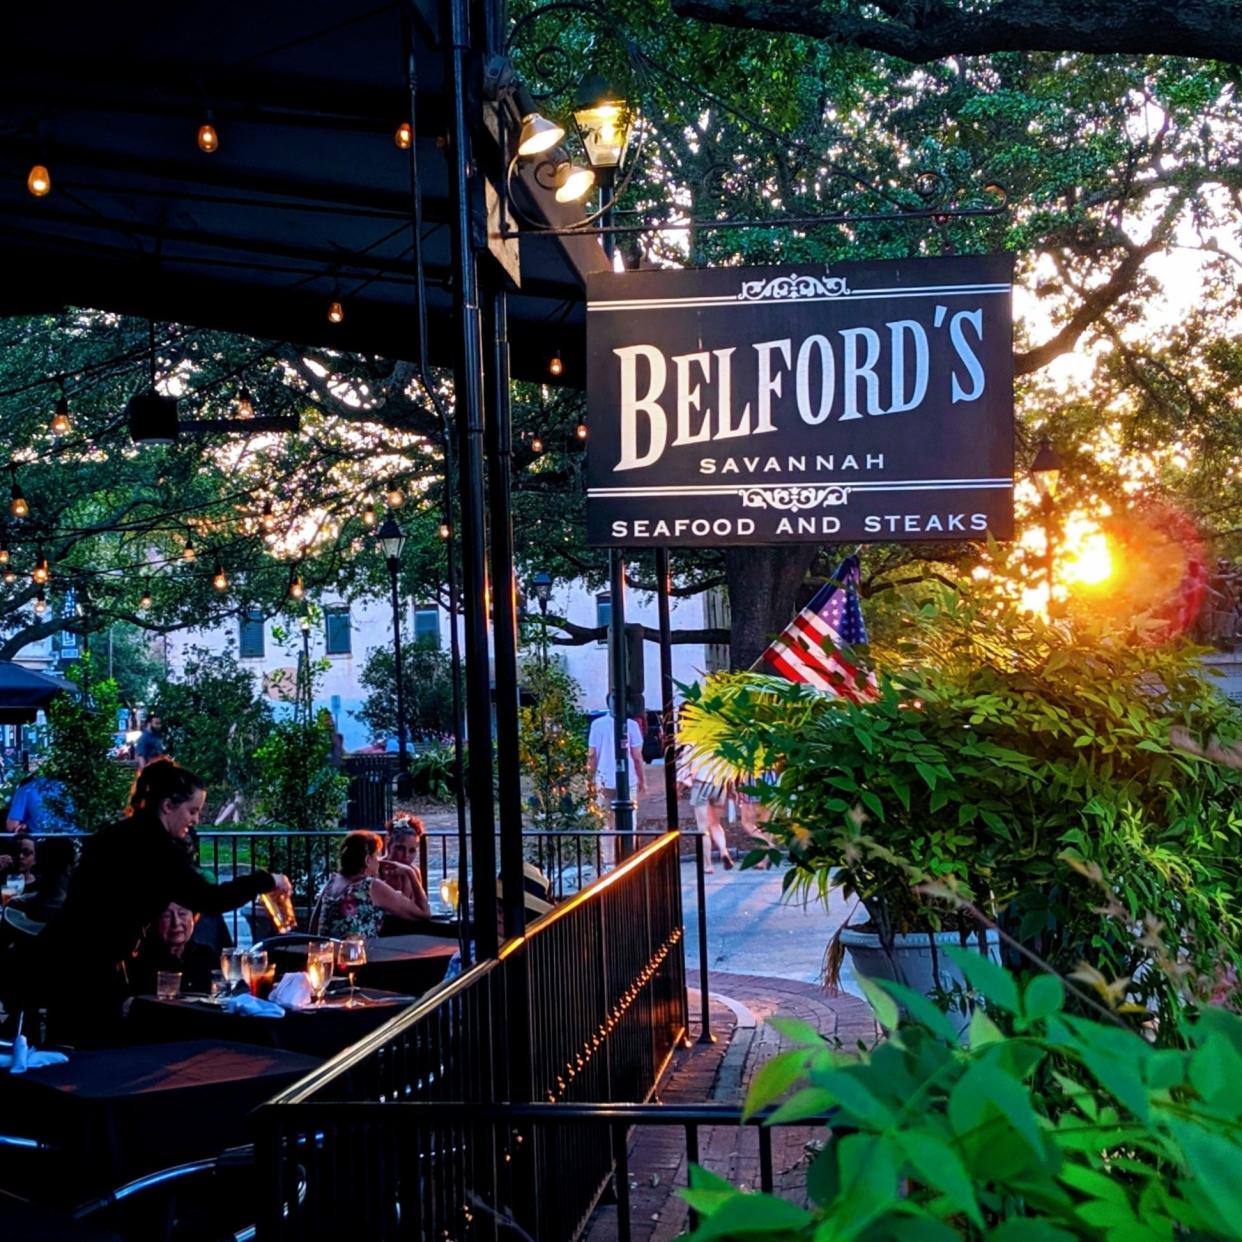 Belford's Savannah Seafood and Steaks is hosting a Thanksgiving Day dinner.